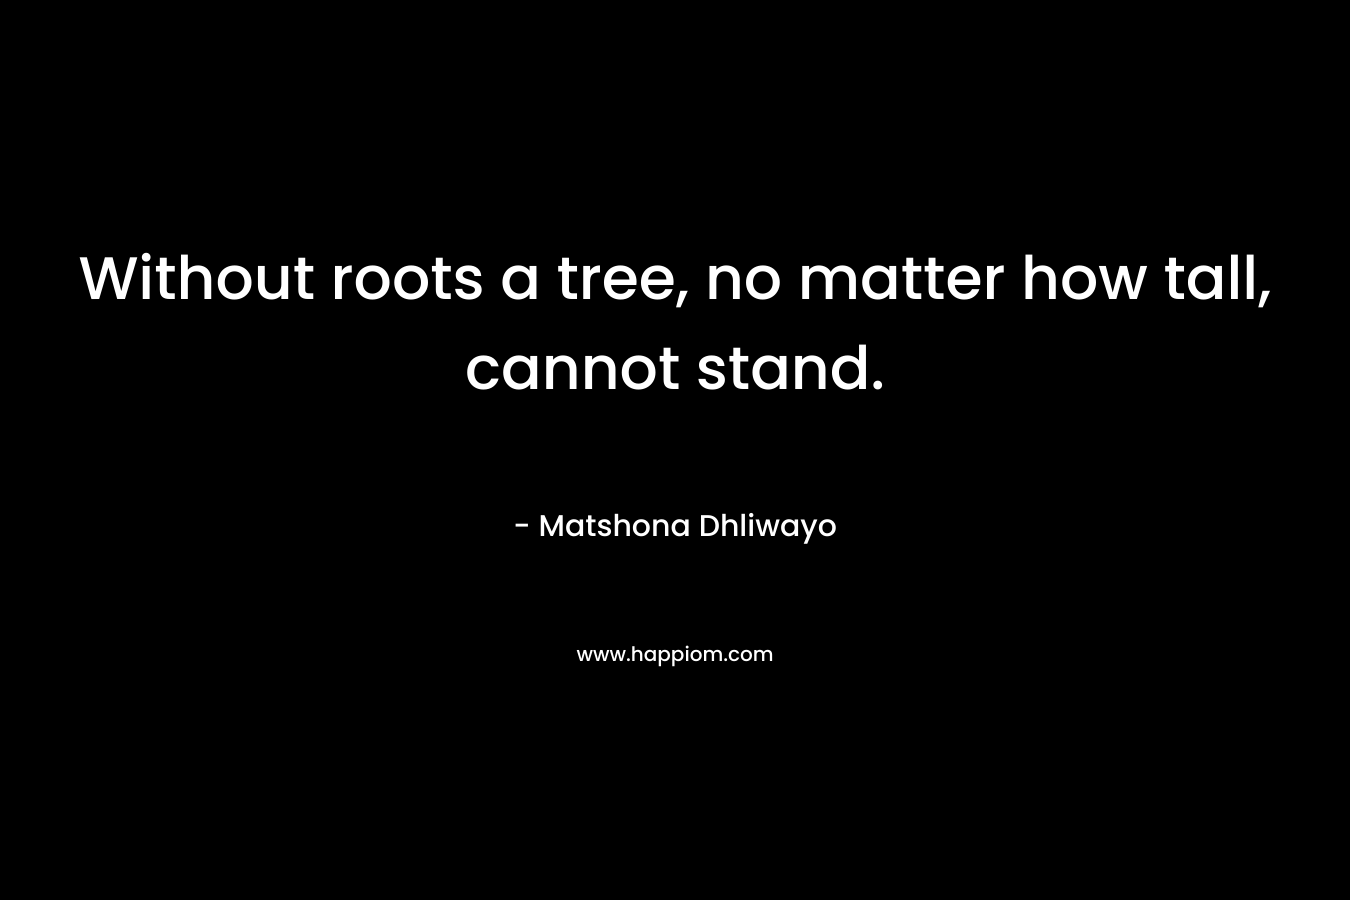 Without roots a tree, no matter how tall, cannot stand.